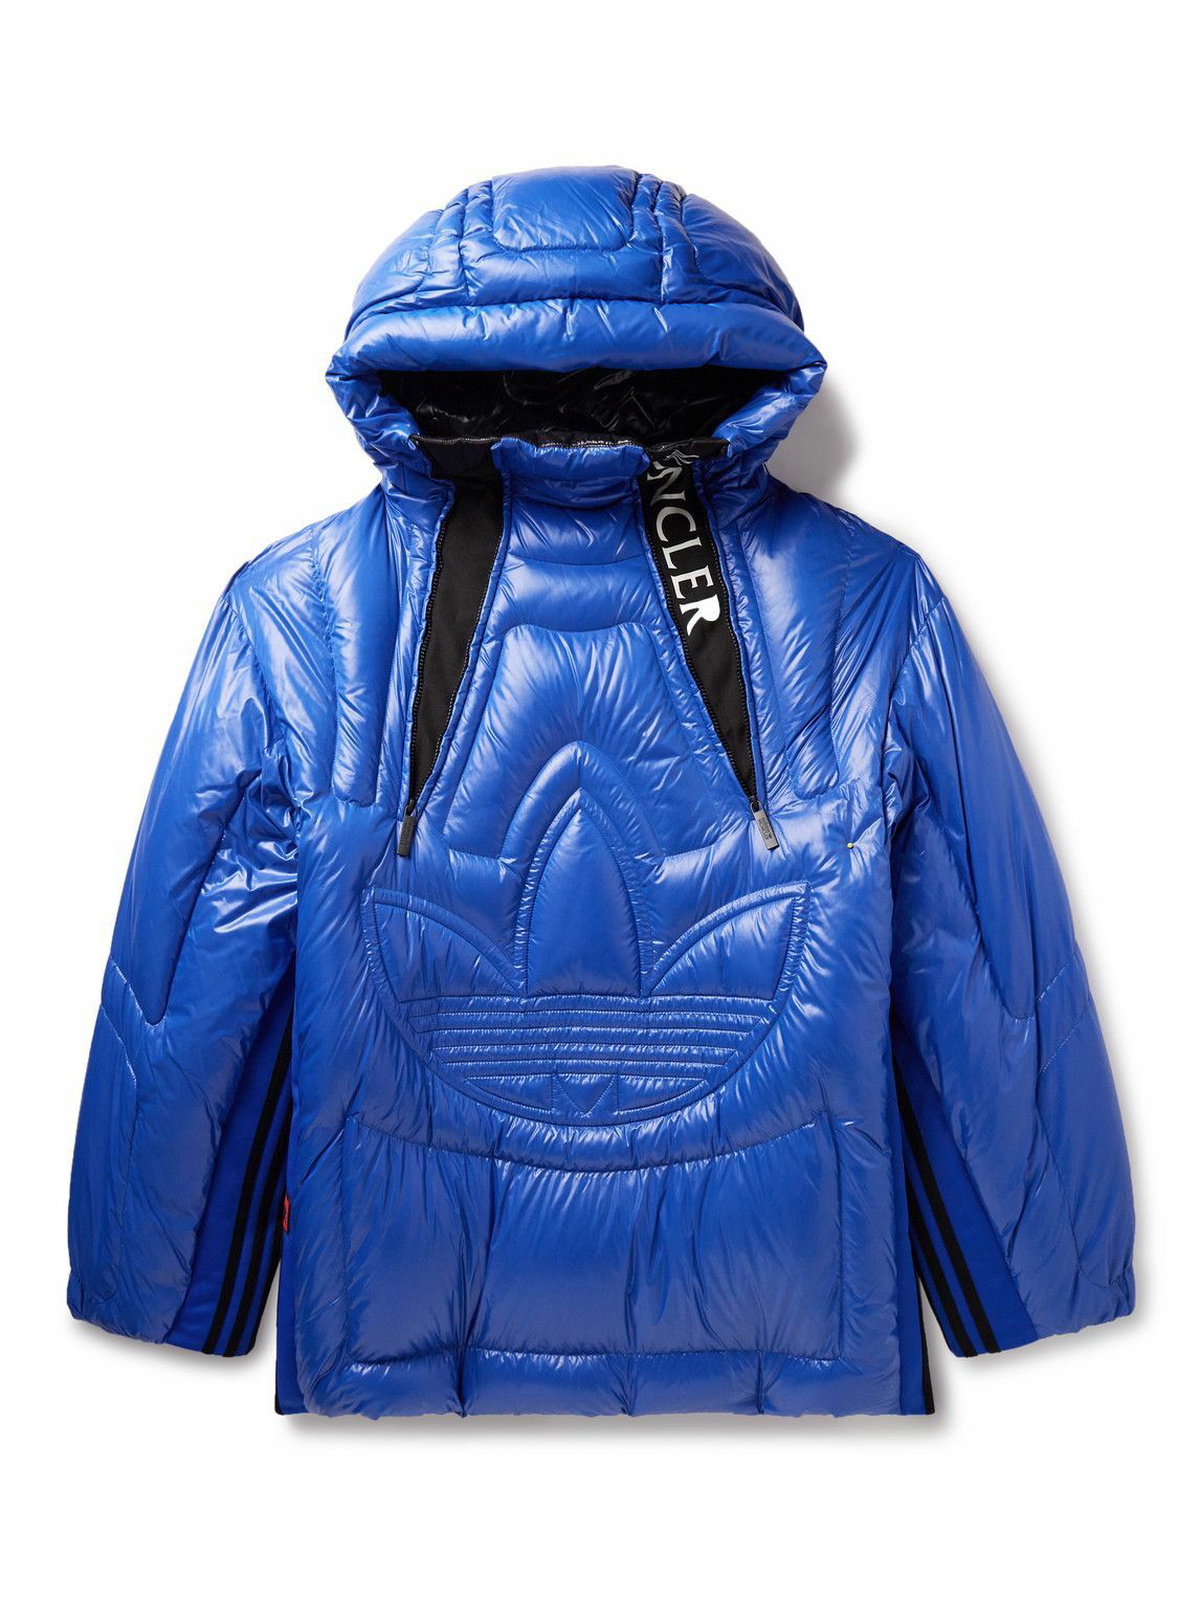 Moncler Genius - adidas Originals Chambery Canvas-Trimmed Quilted ...